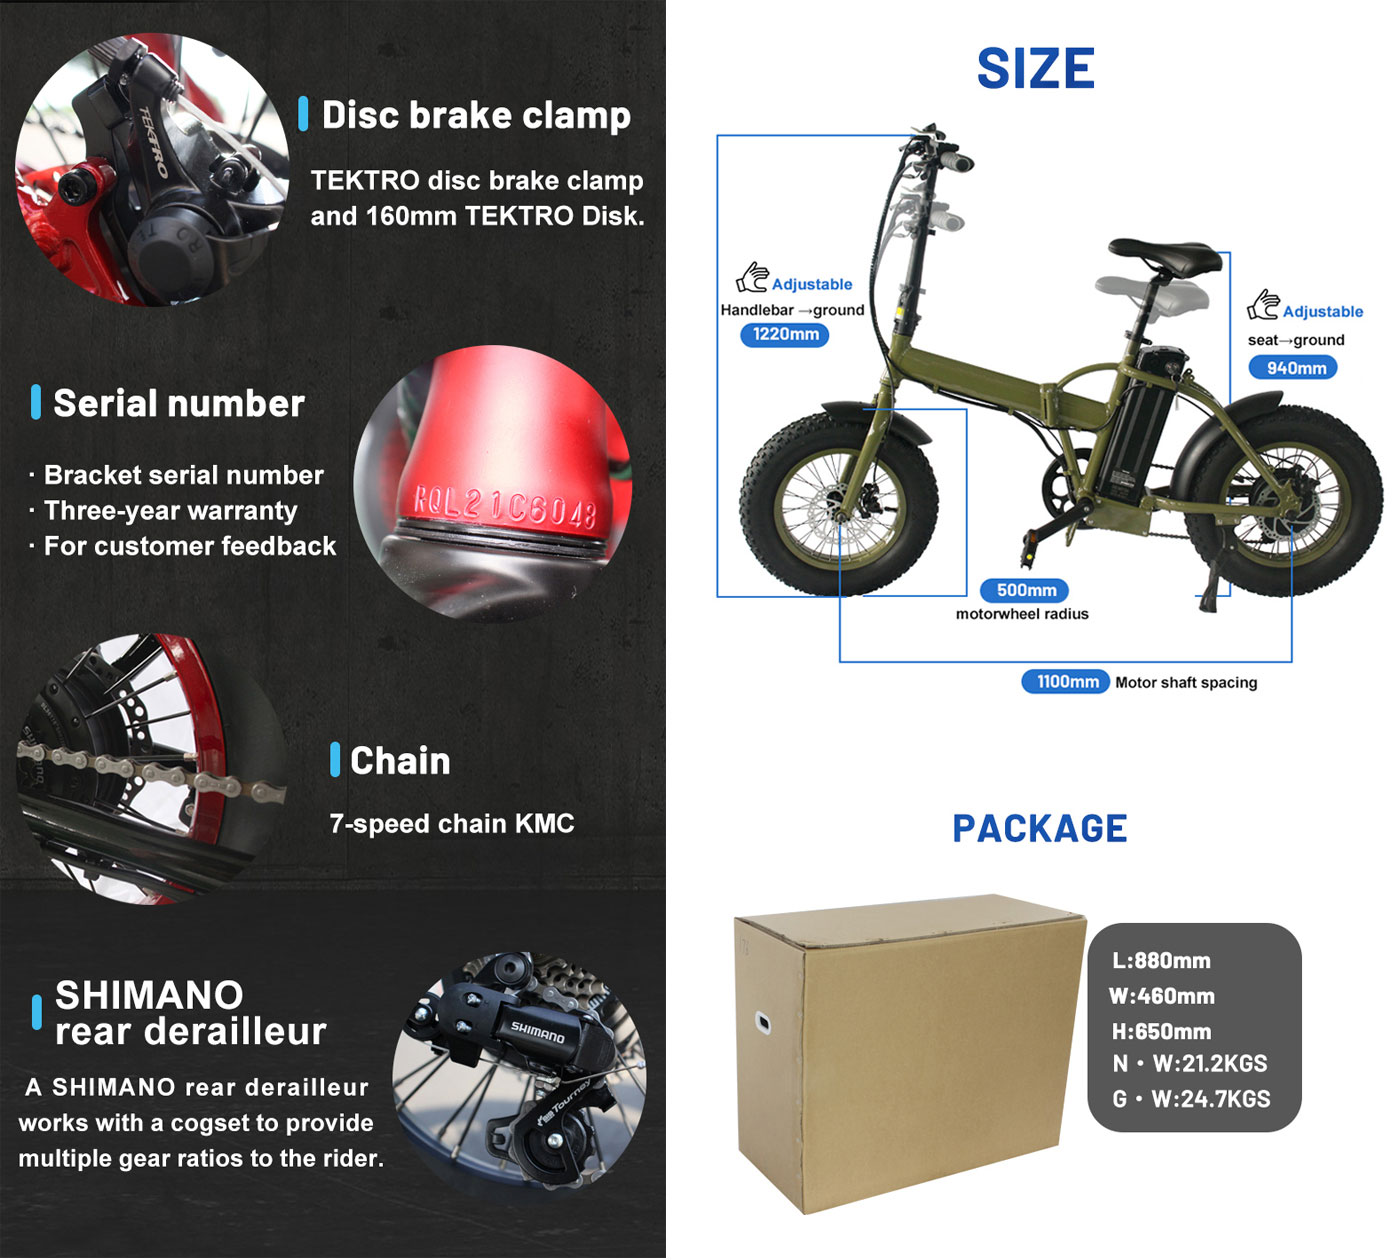 Folding E Bike fat tire bicycle with 36v 10ah battery for sale